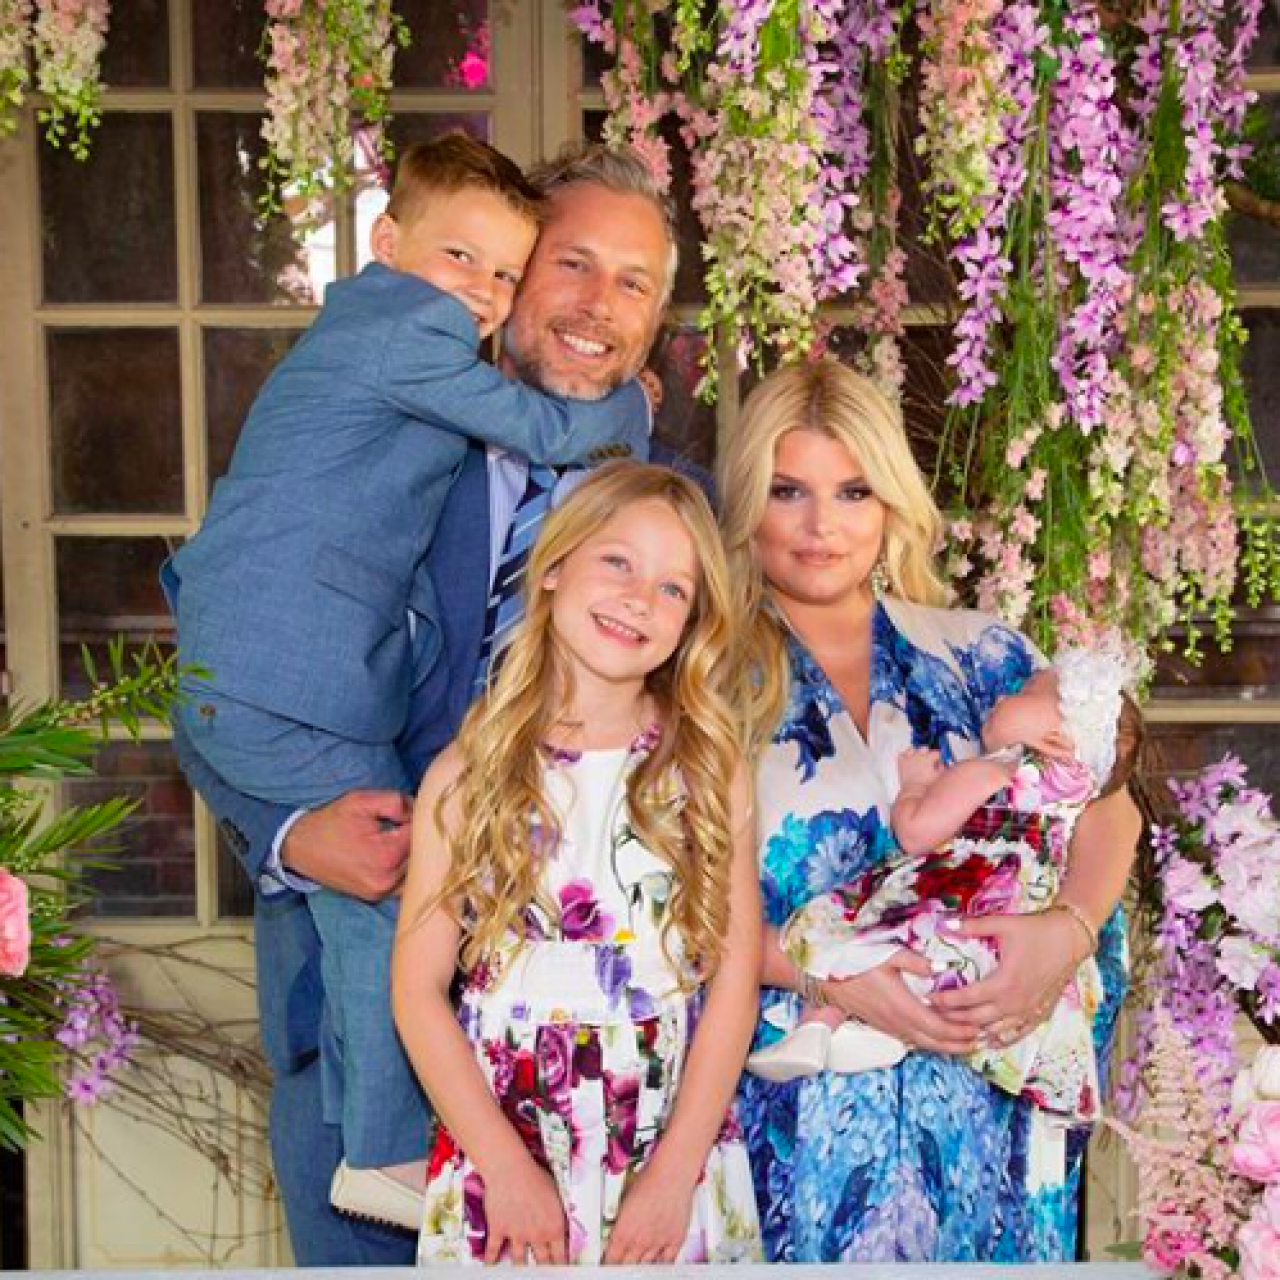 Jessica Simpson Gives Look Inside Day with Daughter Birdie